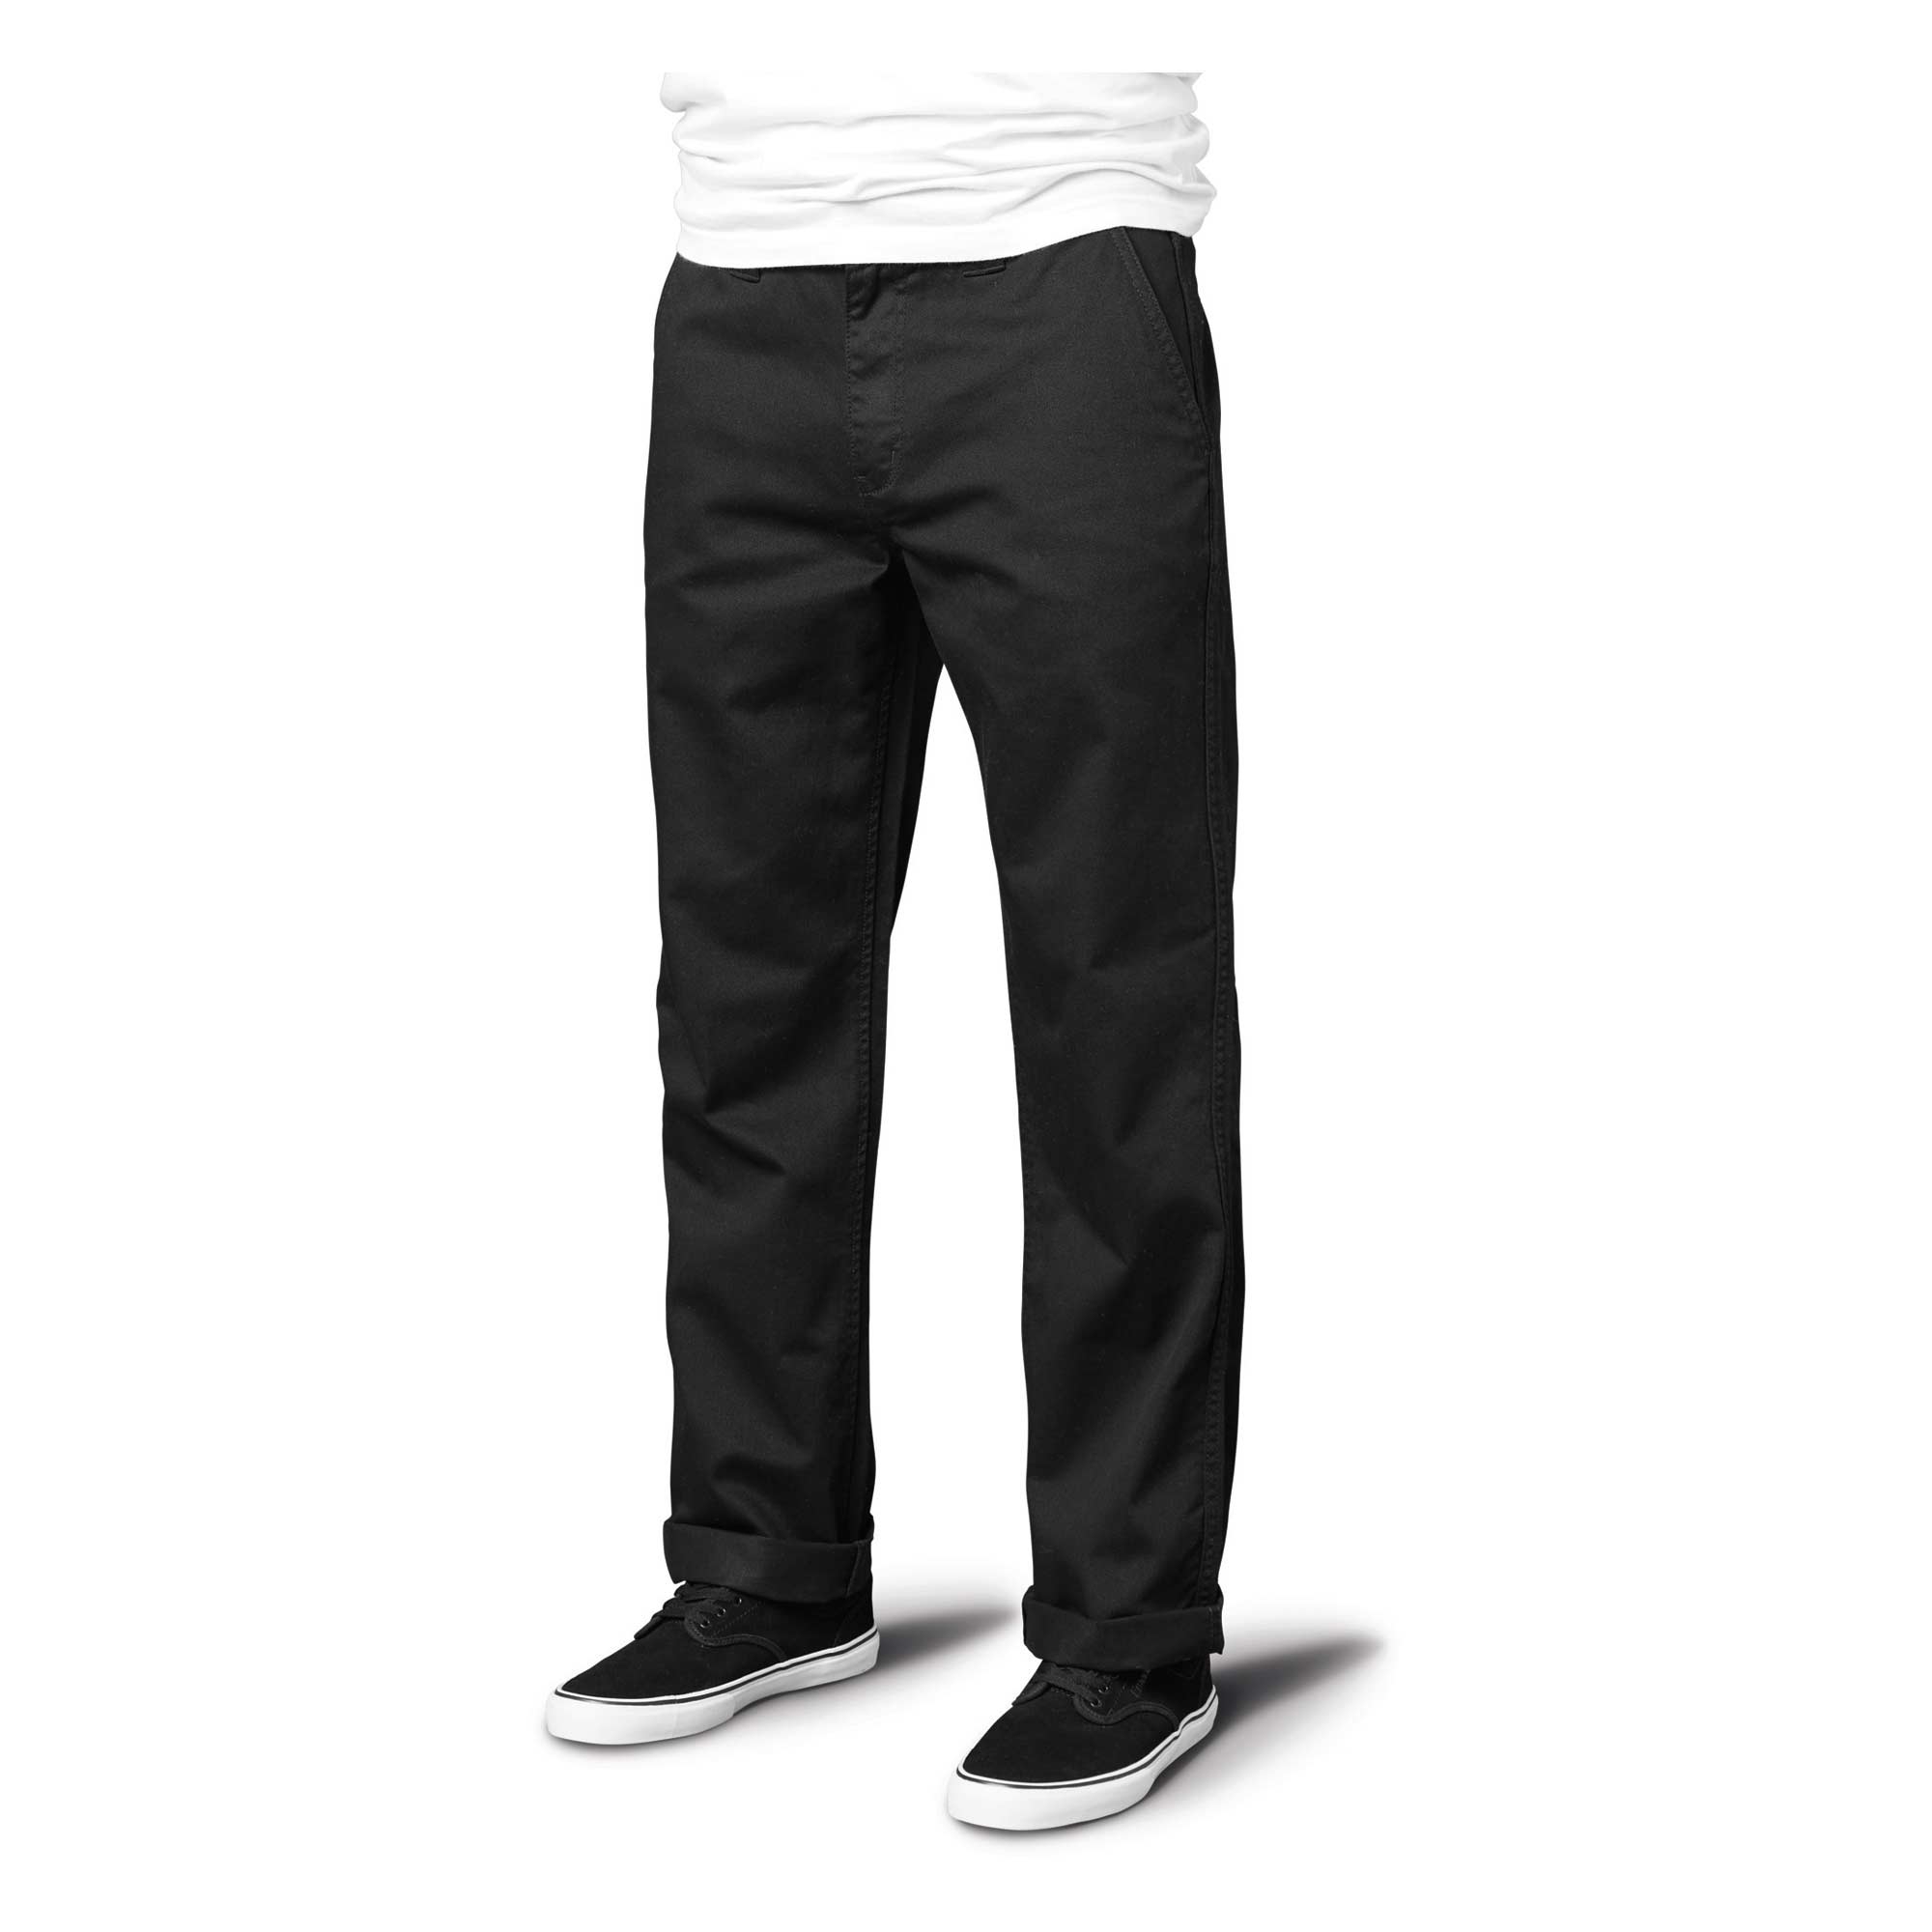 ALTAMONT Pant A/989 CHINO stain black